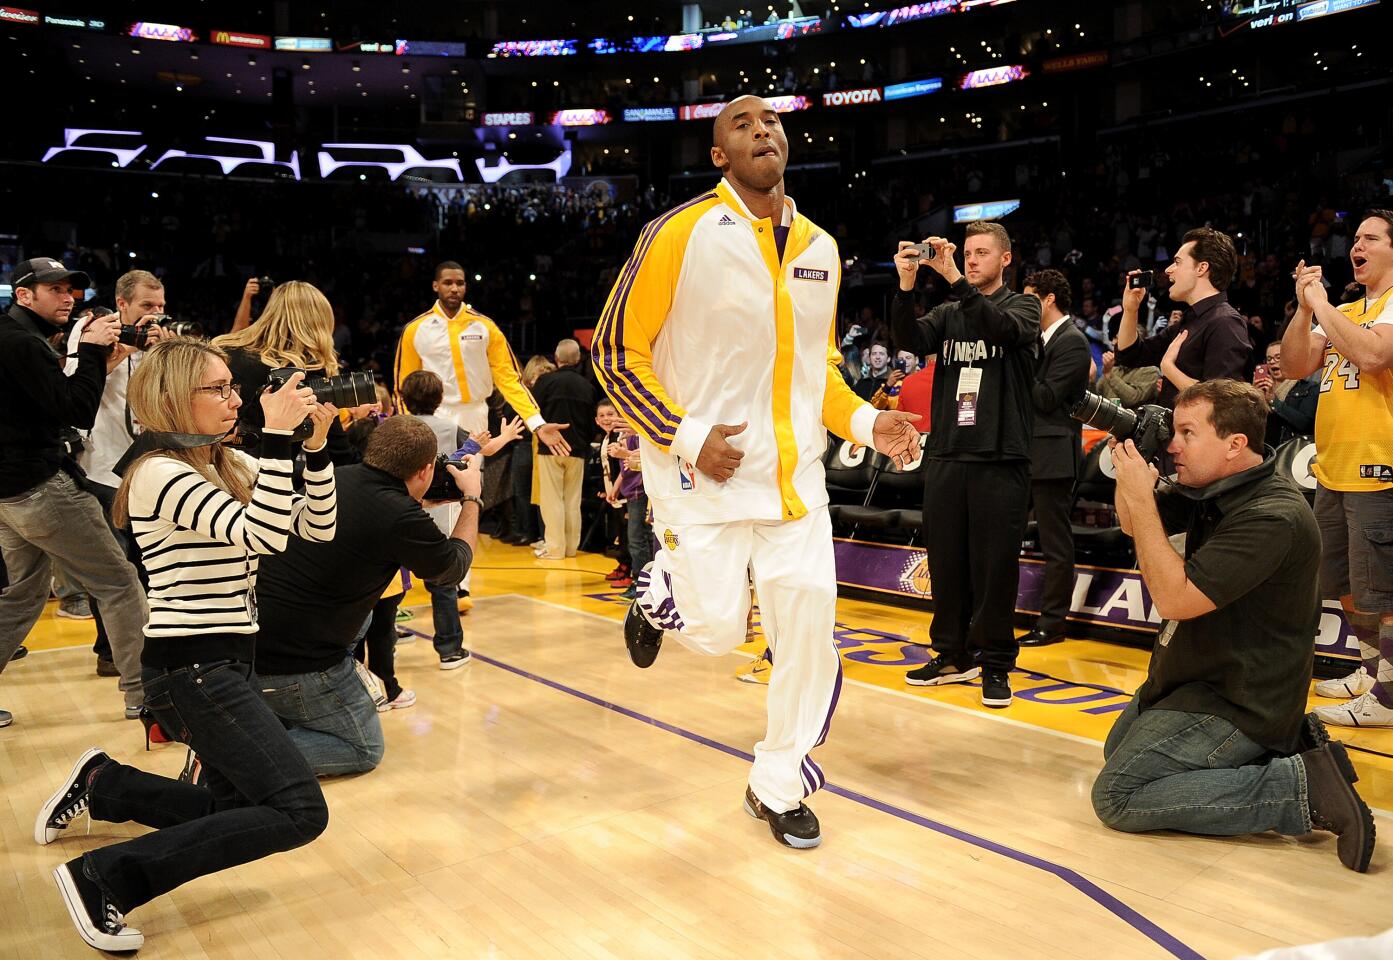 Kobe Bryant warms up during his first game after tearing his Achilles.